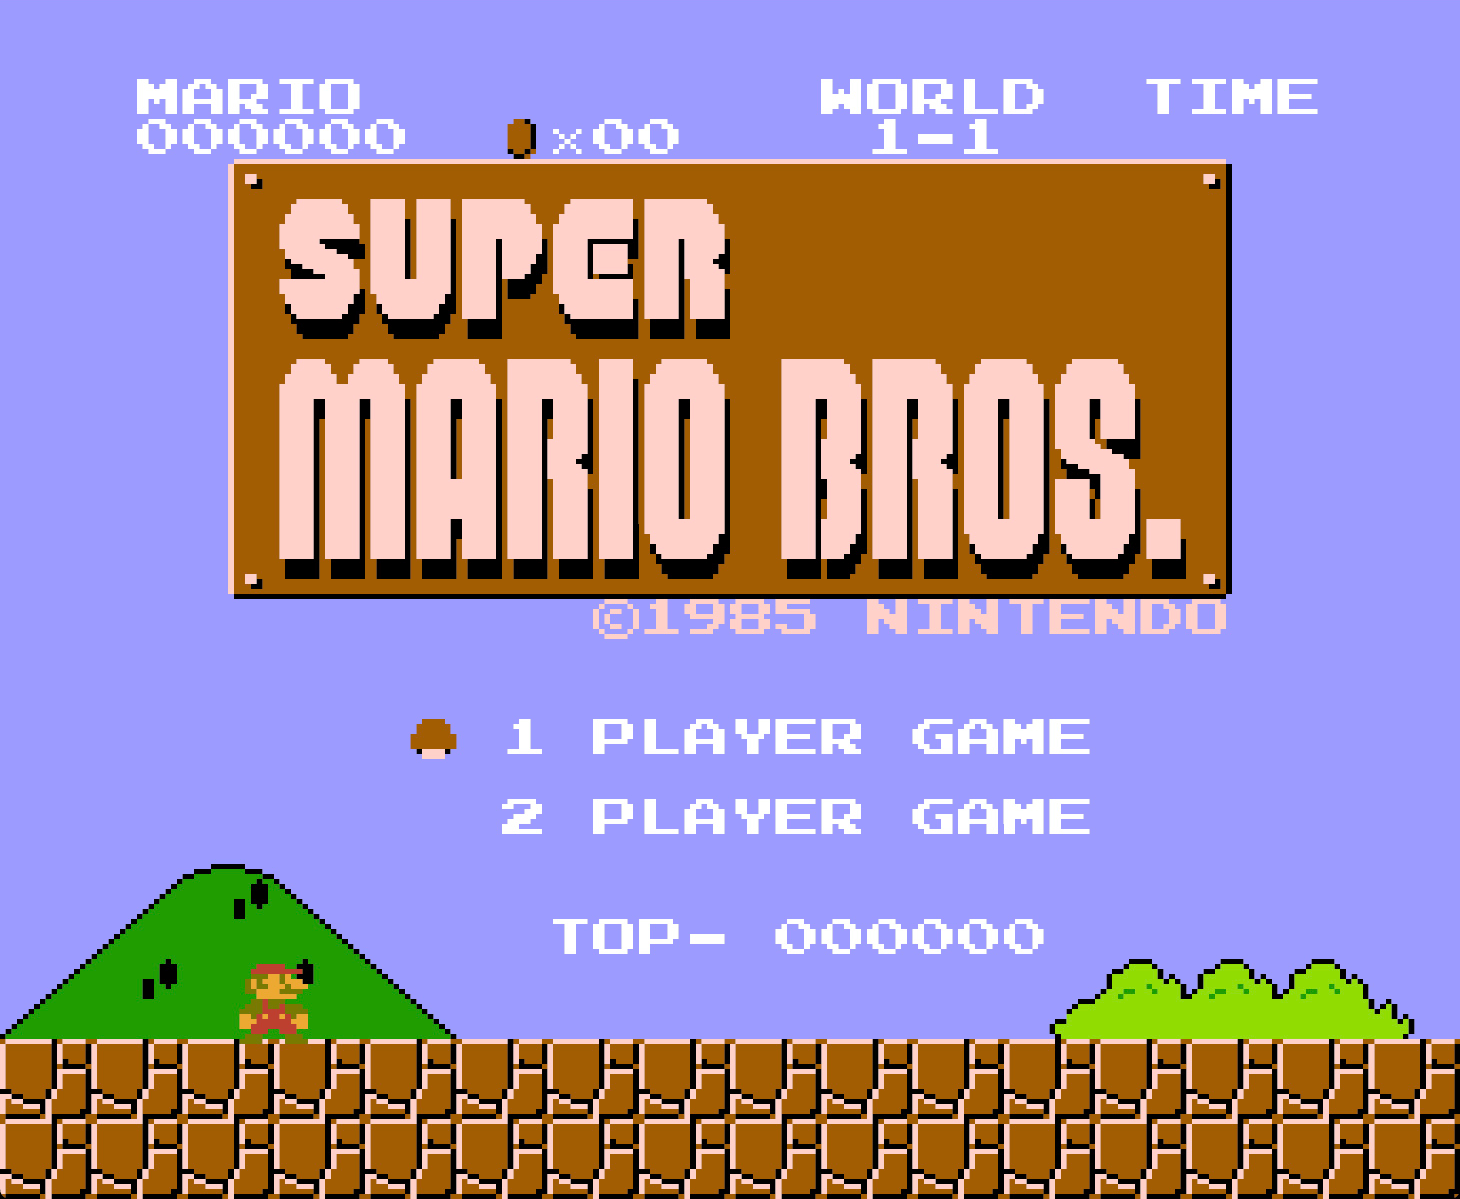 Best Mario Games of All-Time